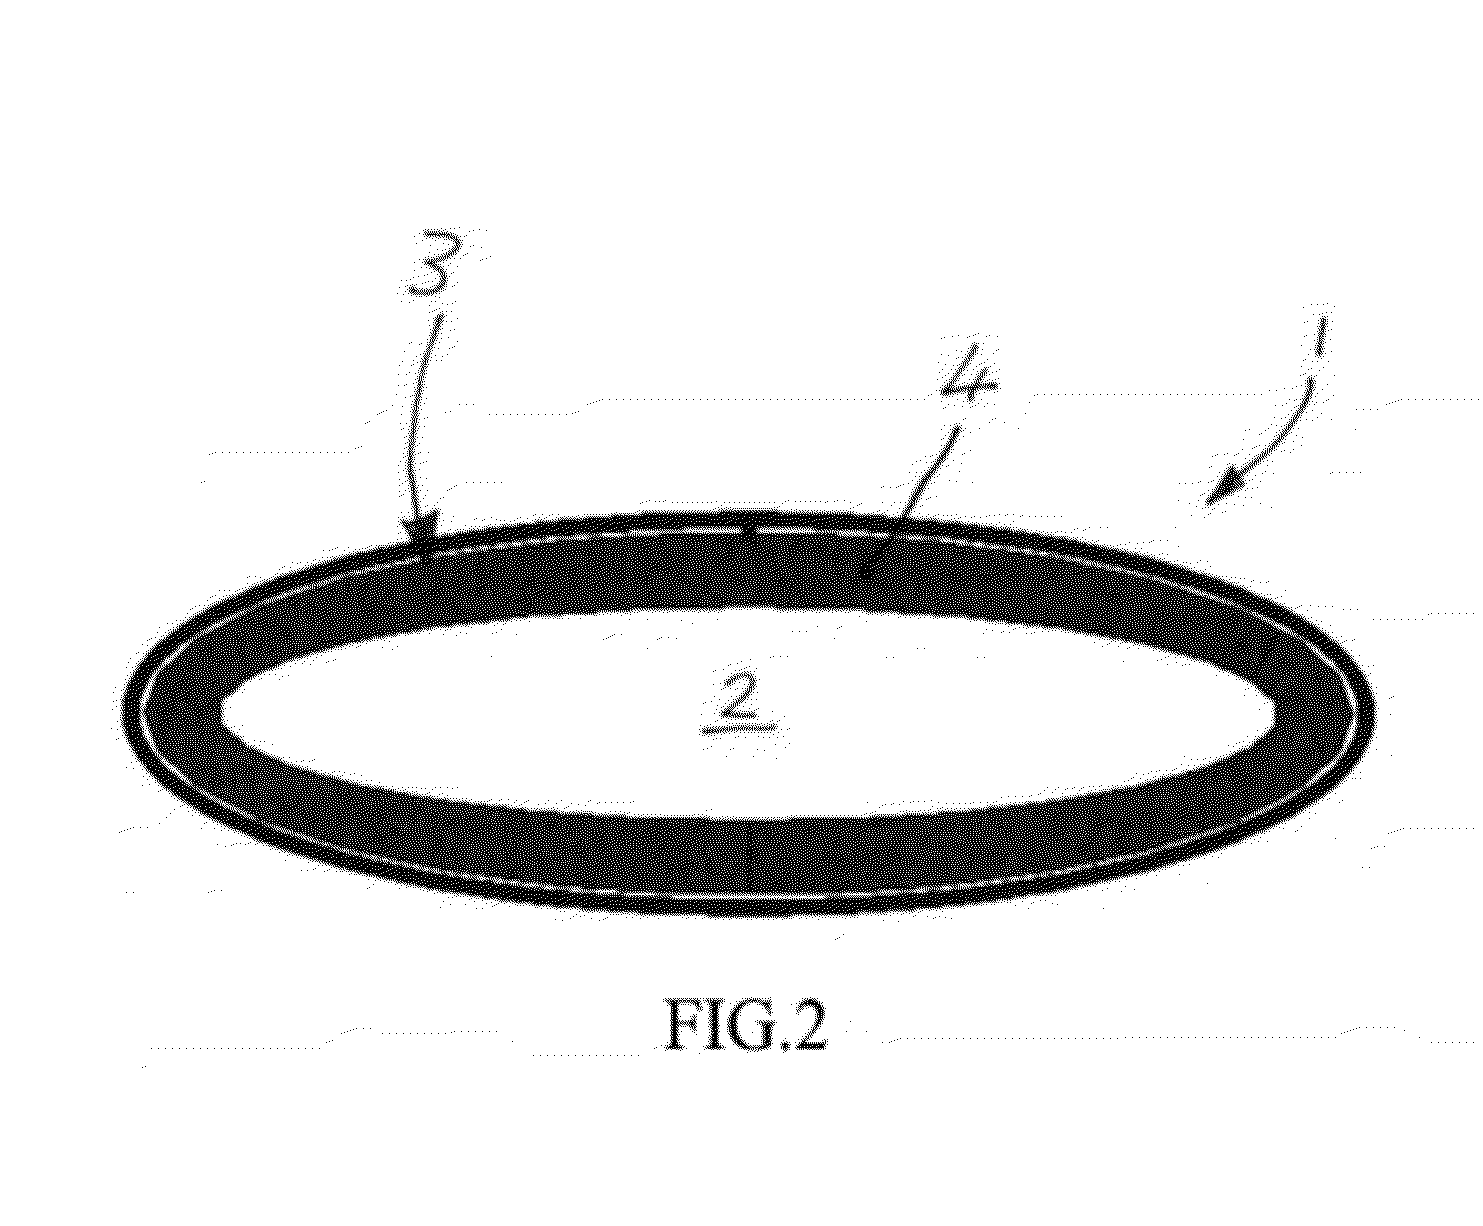 Dielectric loaded elliptical helix antenna